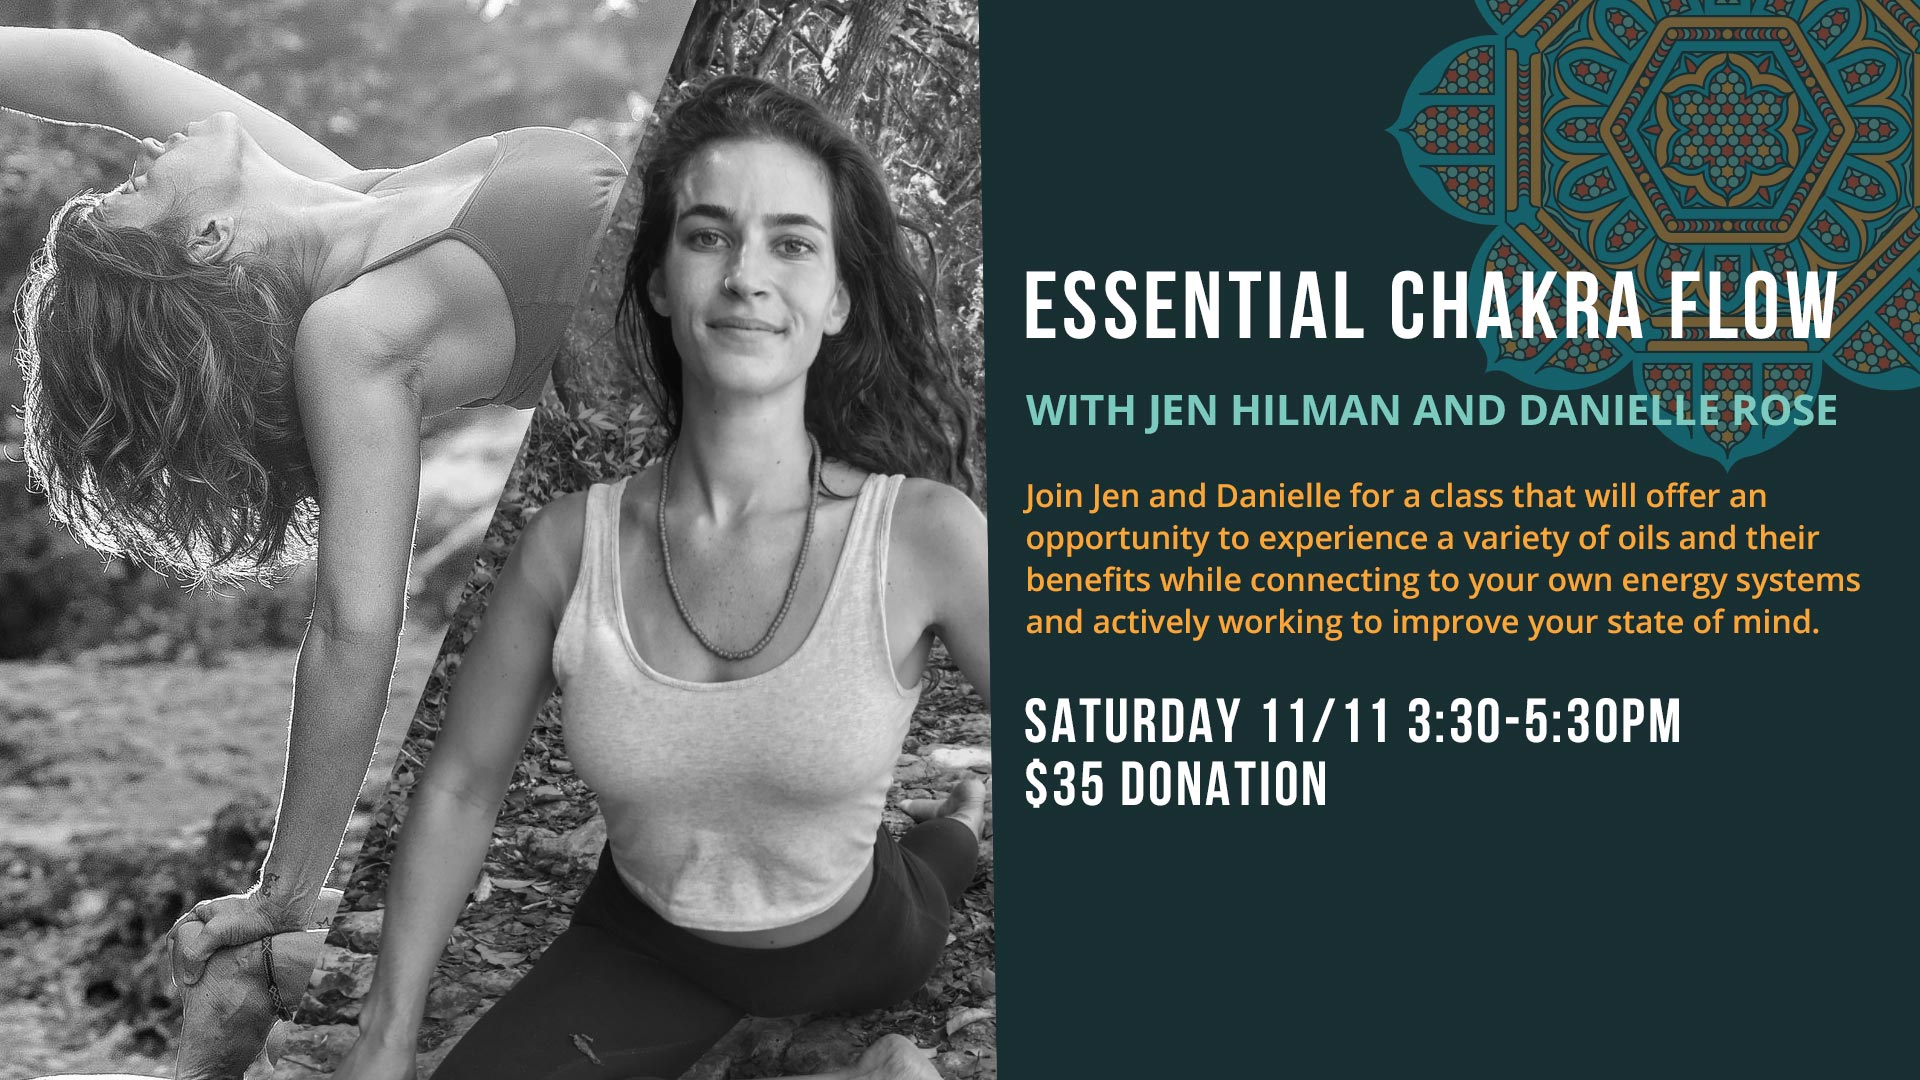 Essential Chakra Flow with Jen and Danielle